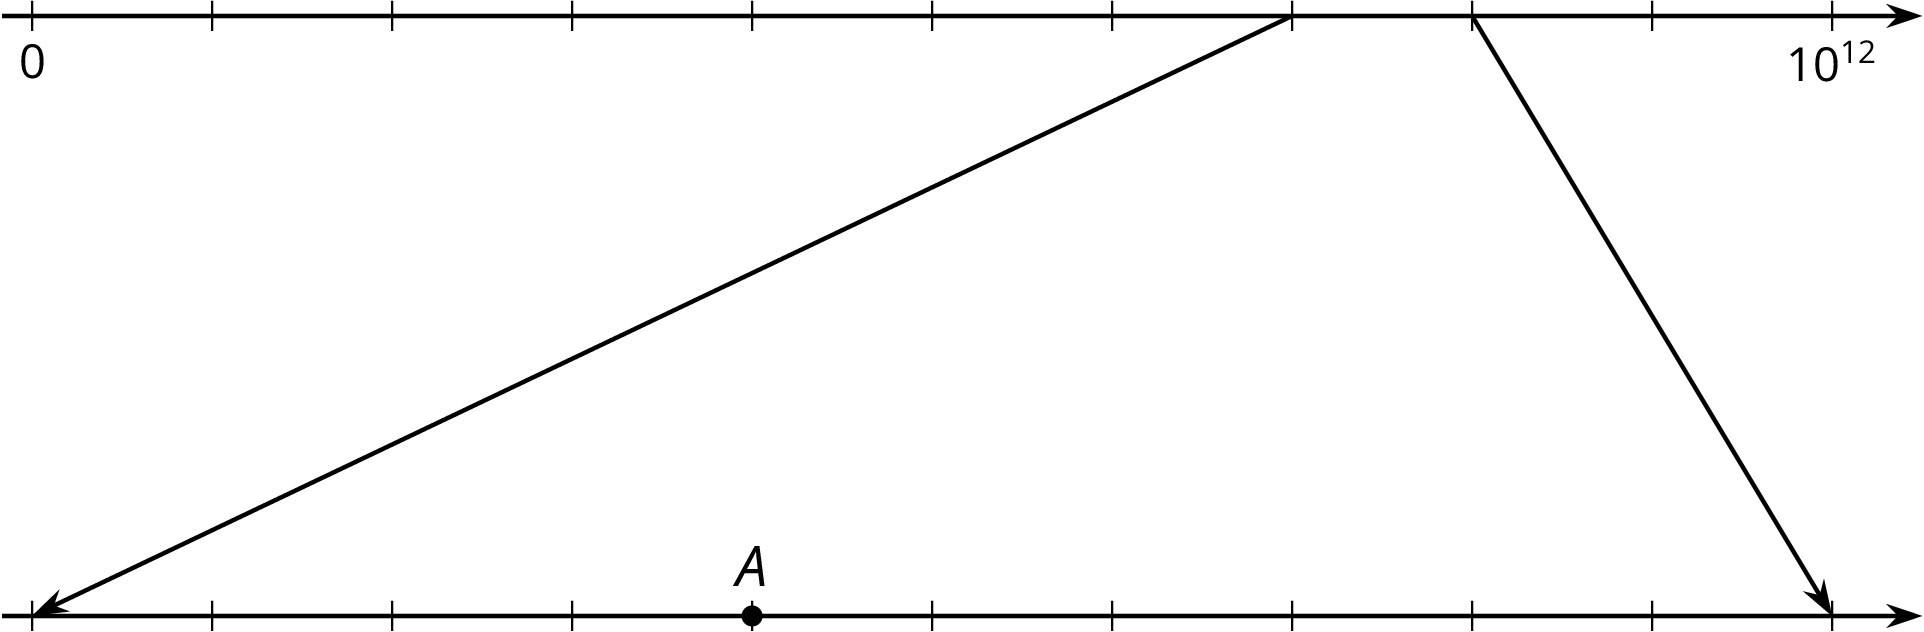 A zoomed in number line where the top and bottom number lines have eleven evenly spaced tick marks. The first tick mark on the top number line is labeled 0 and the last tick mark is labeled 10 to the twelfth power. The remaining tick marks are blank. Two lines extend downward from the eighth and ninth tick marks, pointing to the first and eleveth tick marks on the second number line, representing a zoomed in portion of the first number line. Point A is located on the fifth tick mark, and the remaining tick marks are blank.